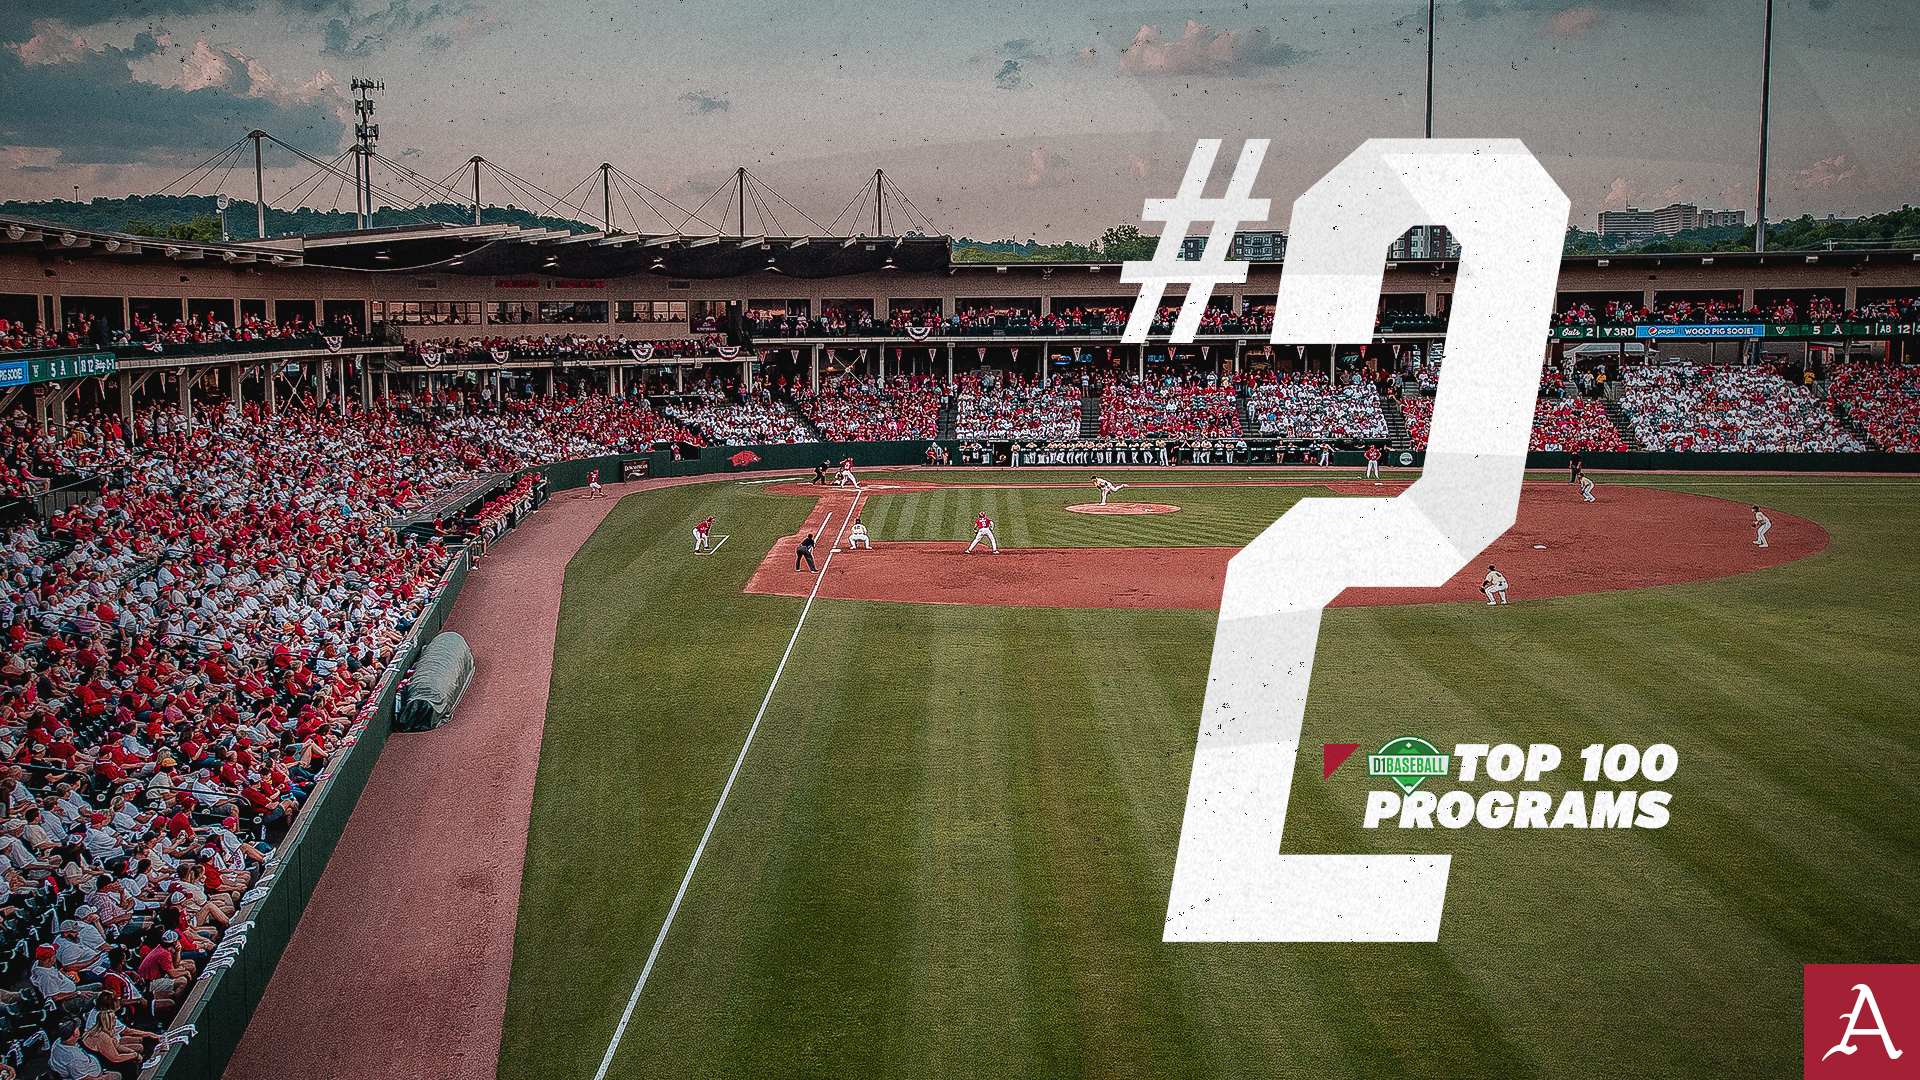 The top 100 programs in college baseball, according to d1baseball.com